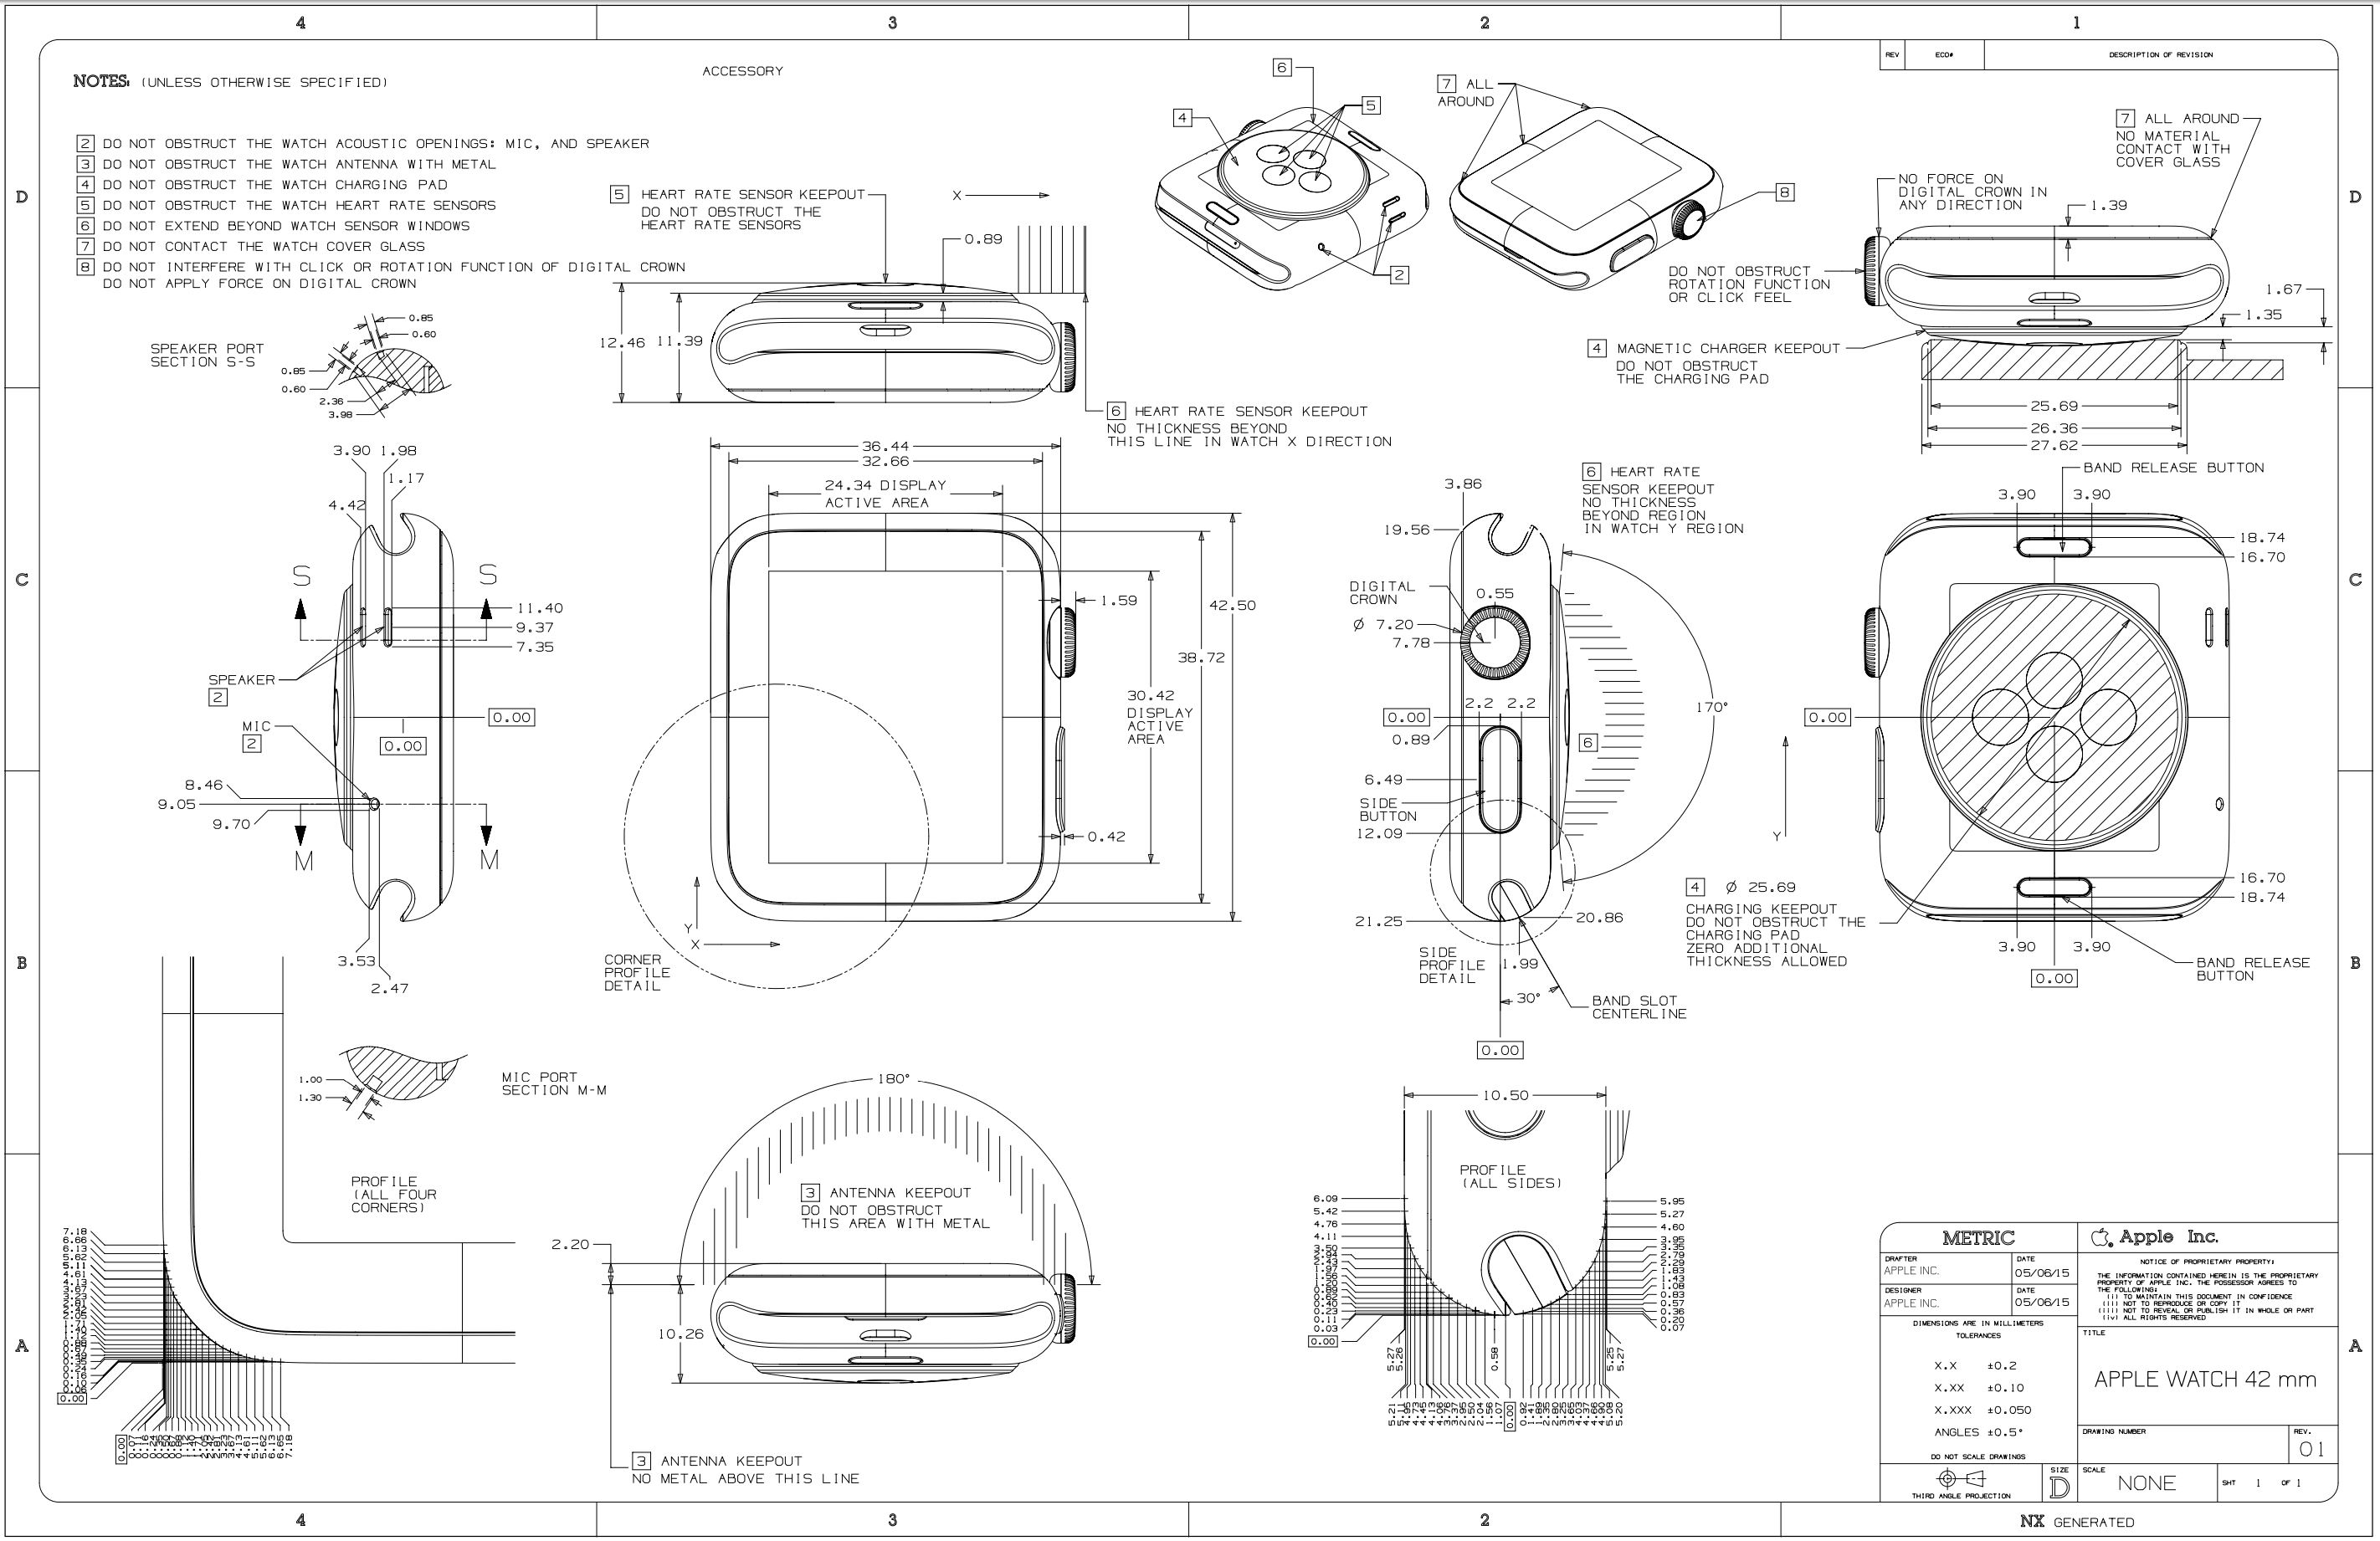 Apple releases technical drawings for the Watch